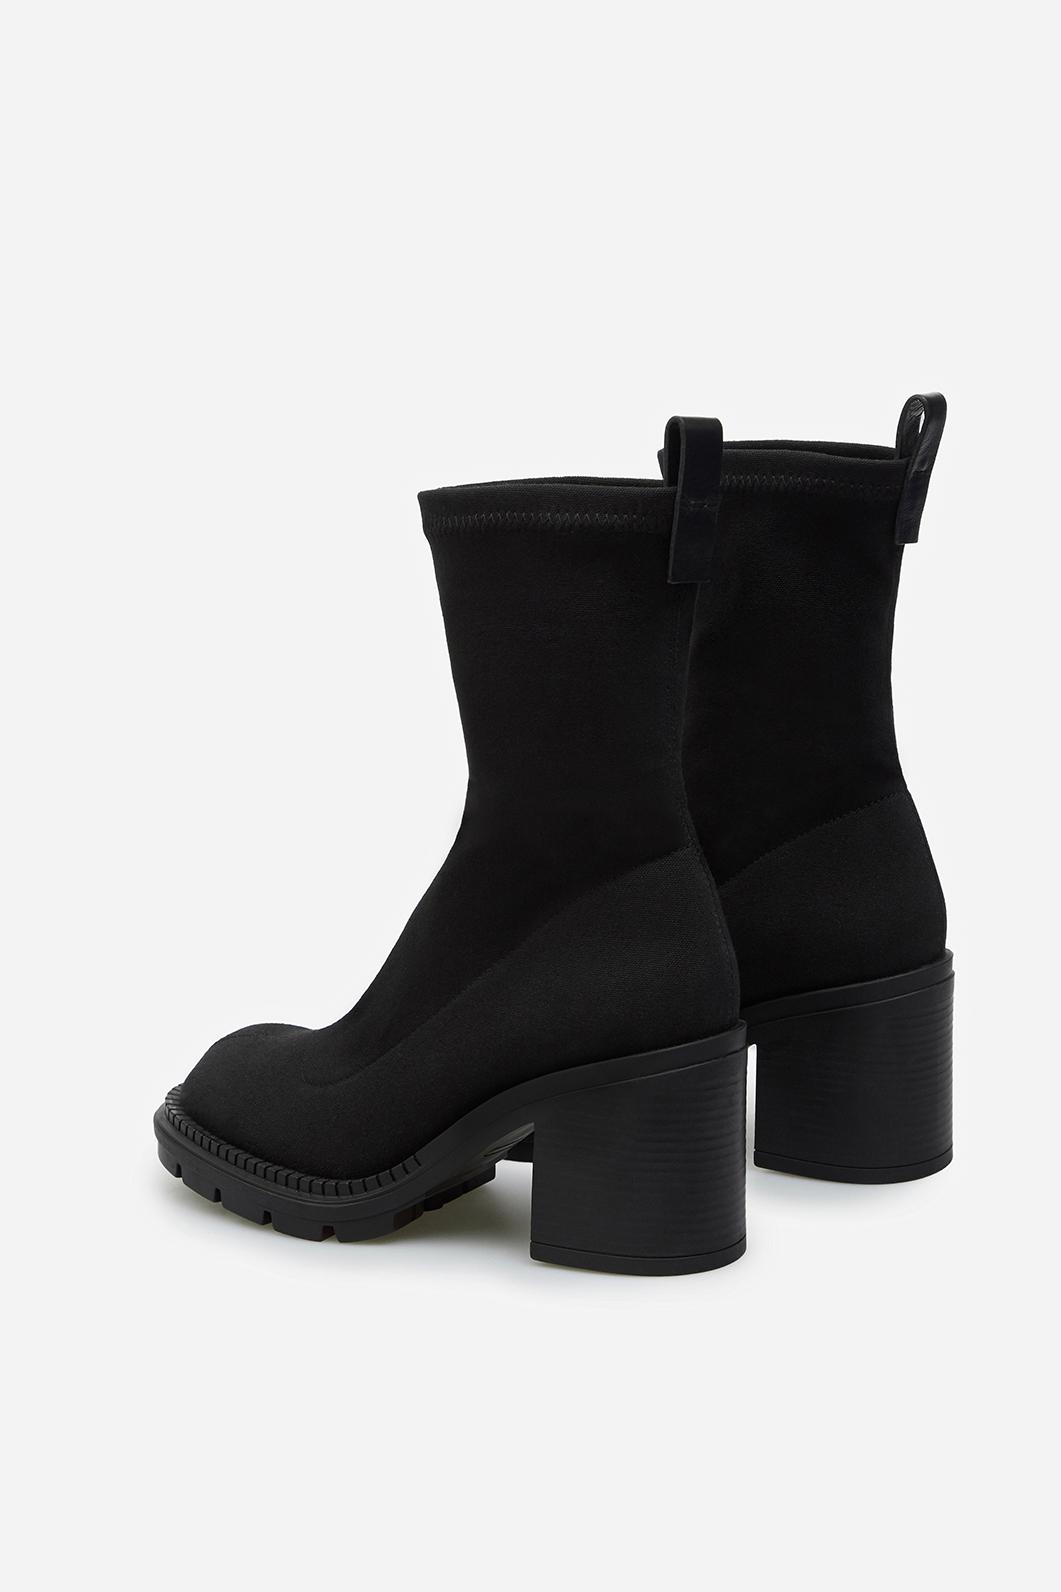 Sonya black stretch
ankle boots